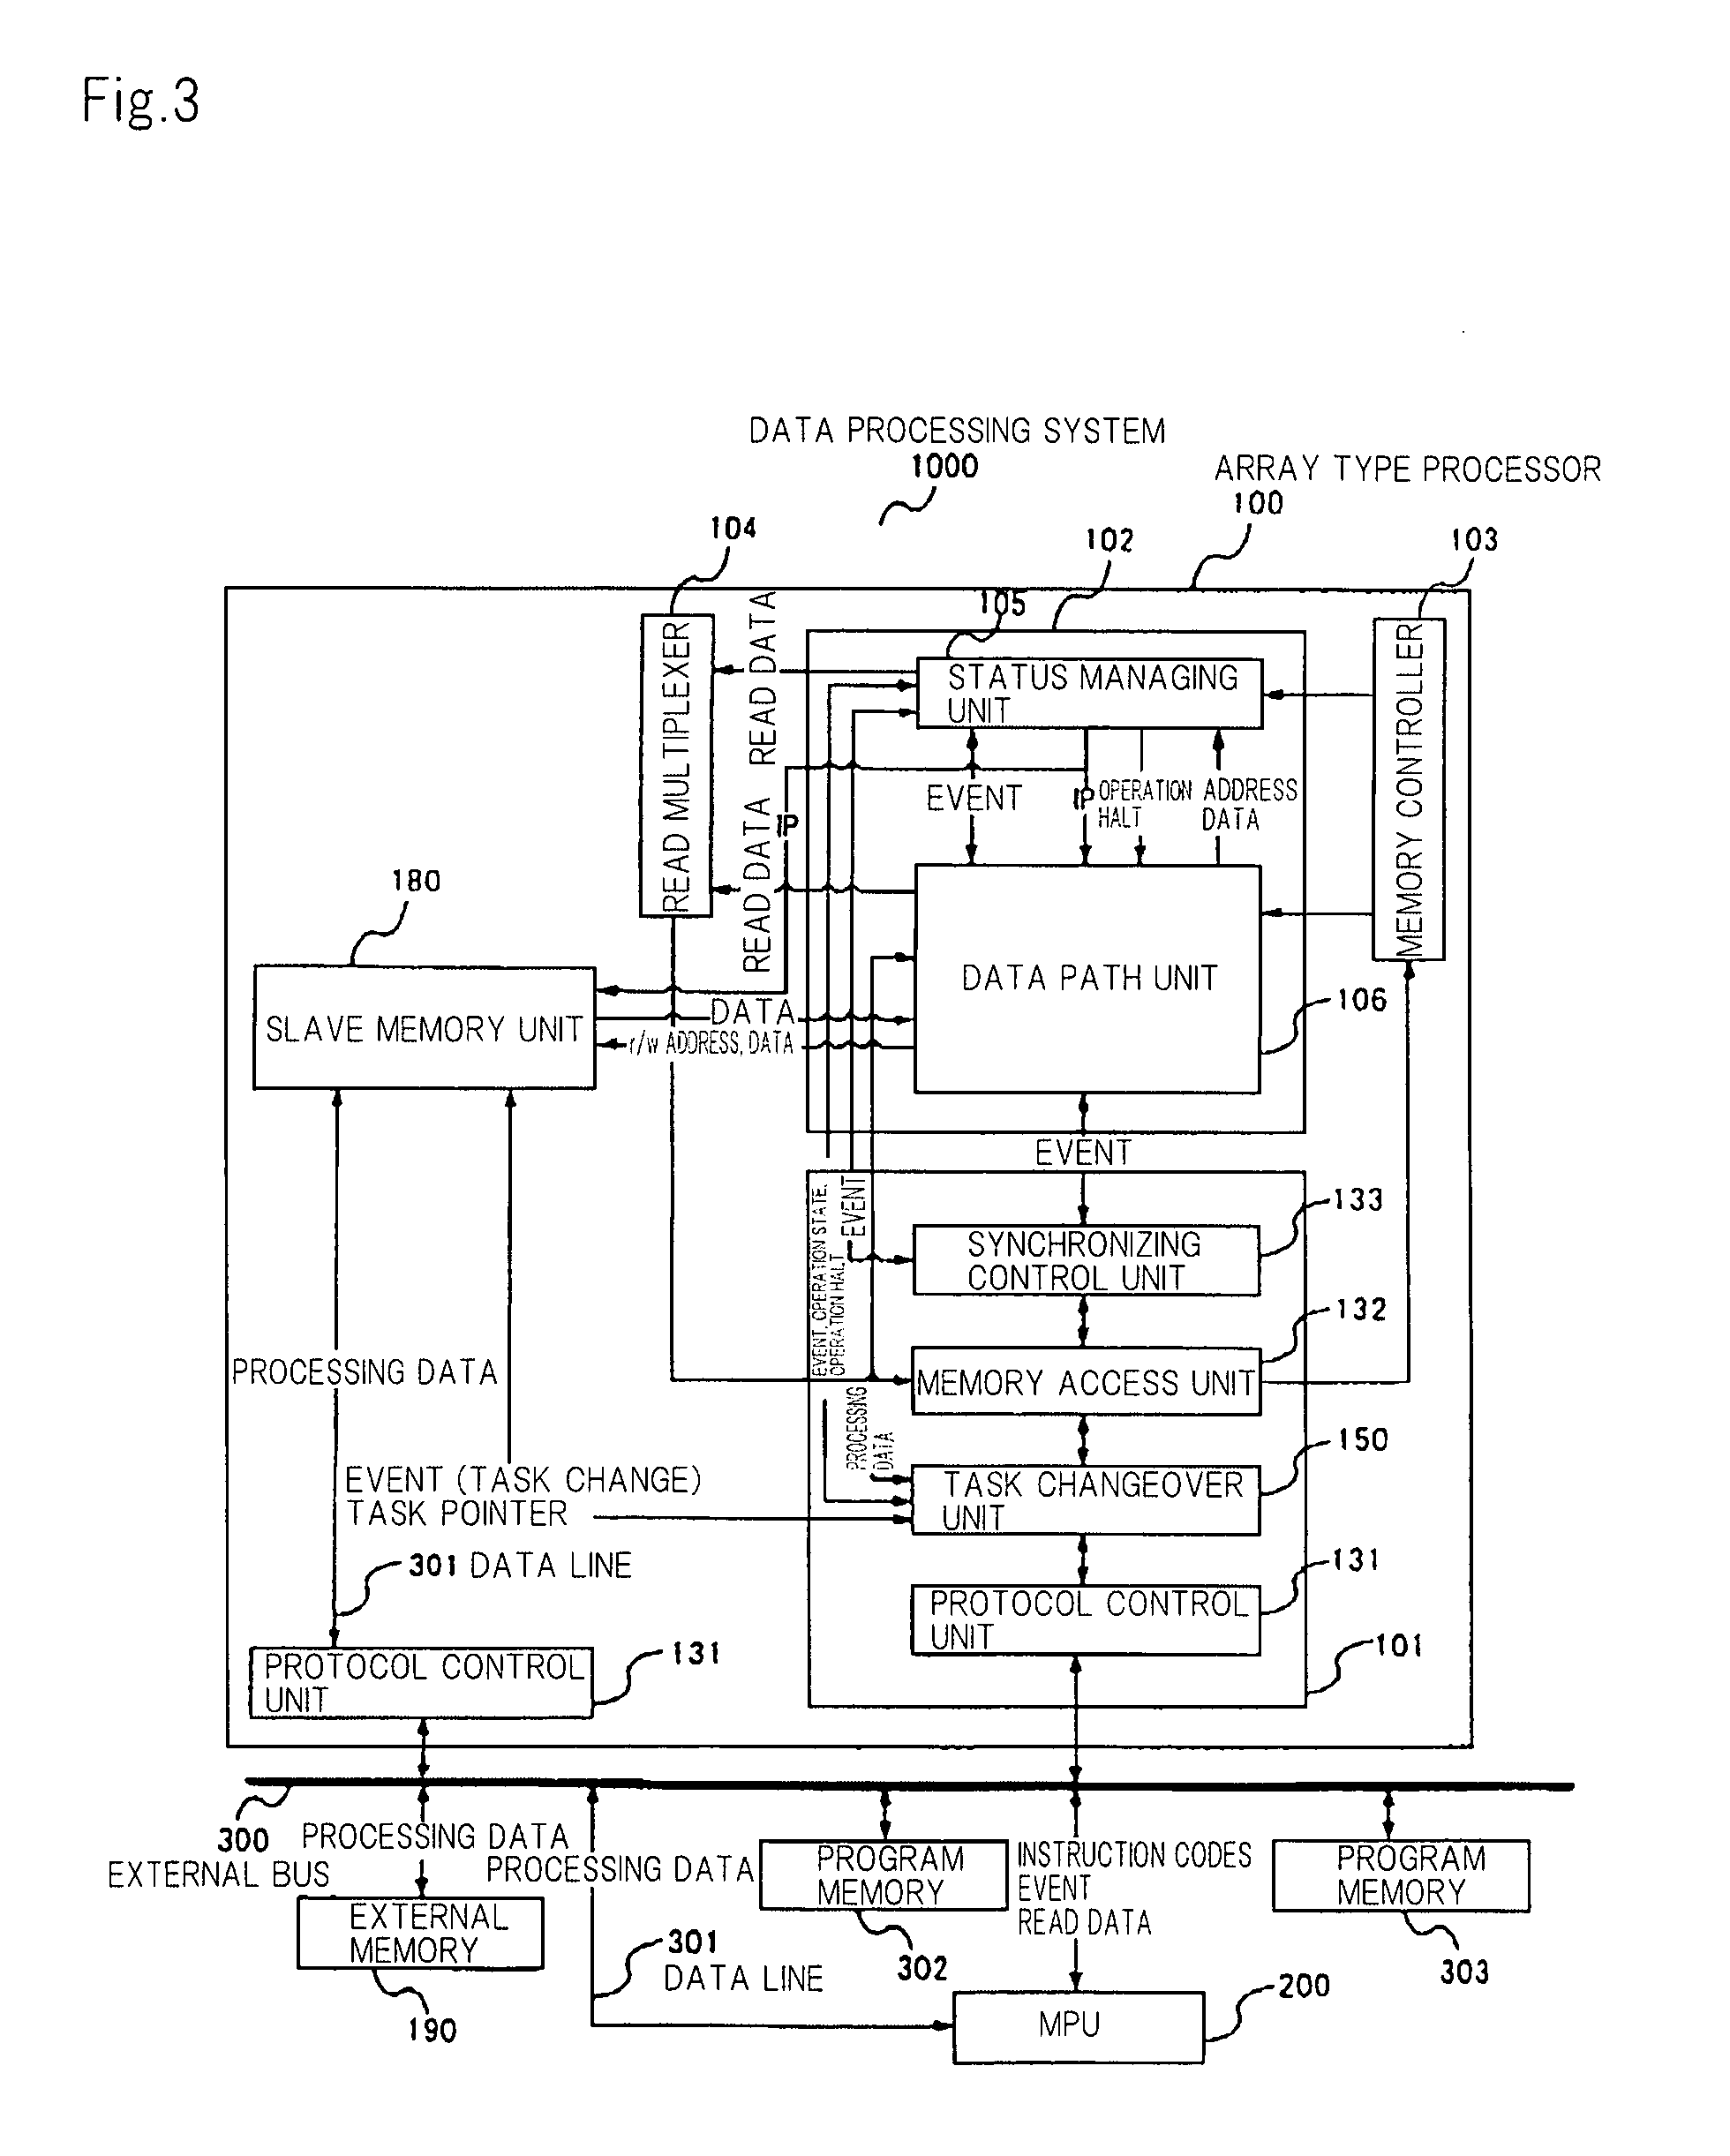 Array type processor and data processing system